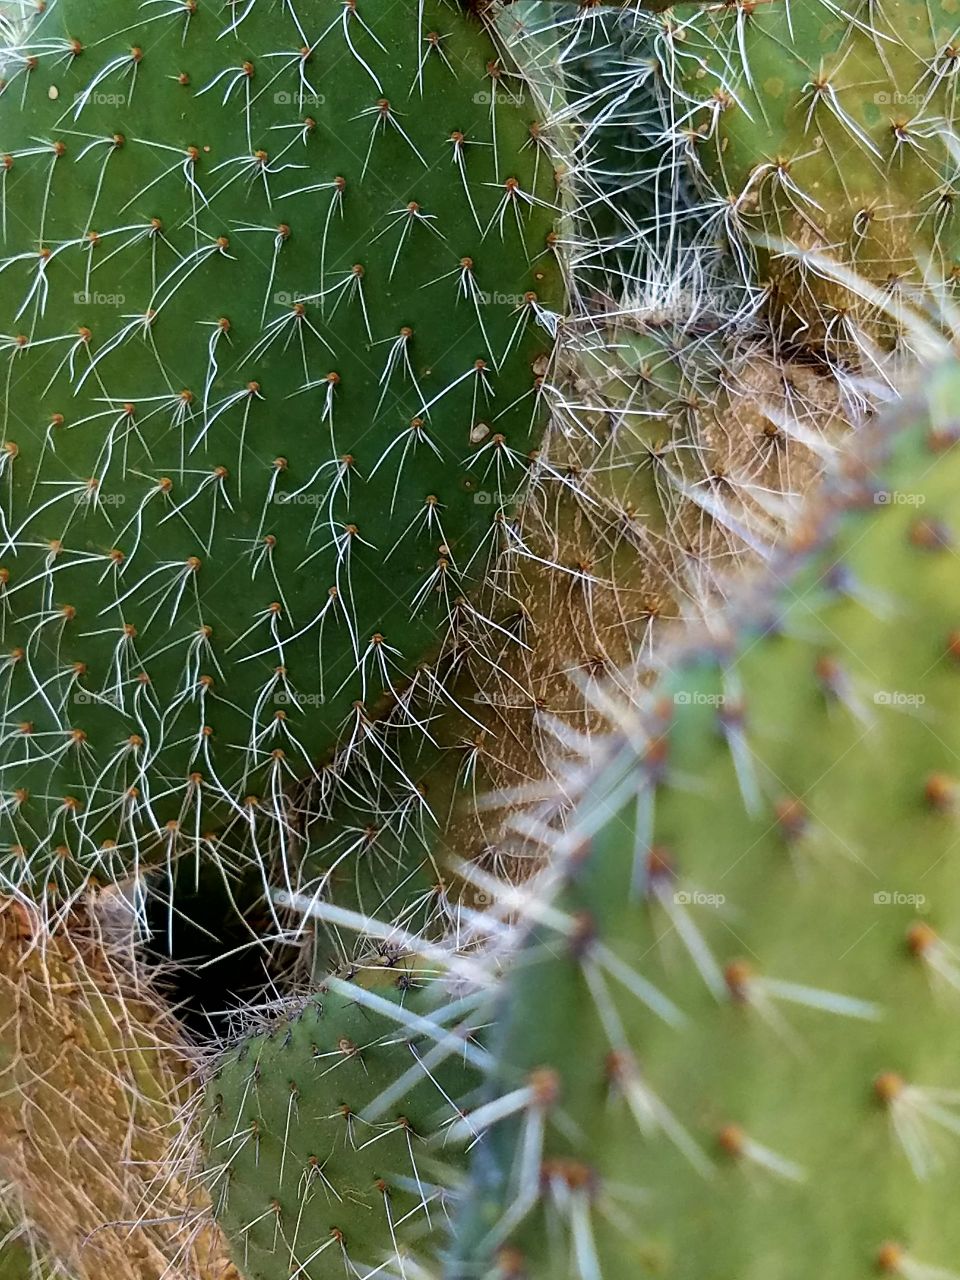 Up Close with a Spiny Cactus